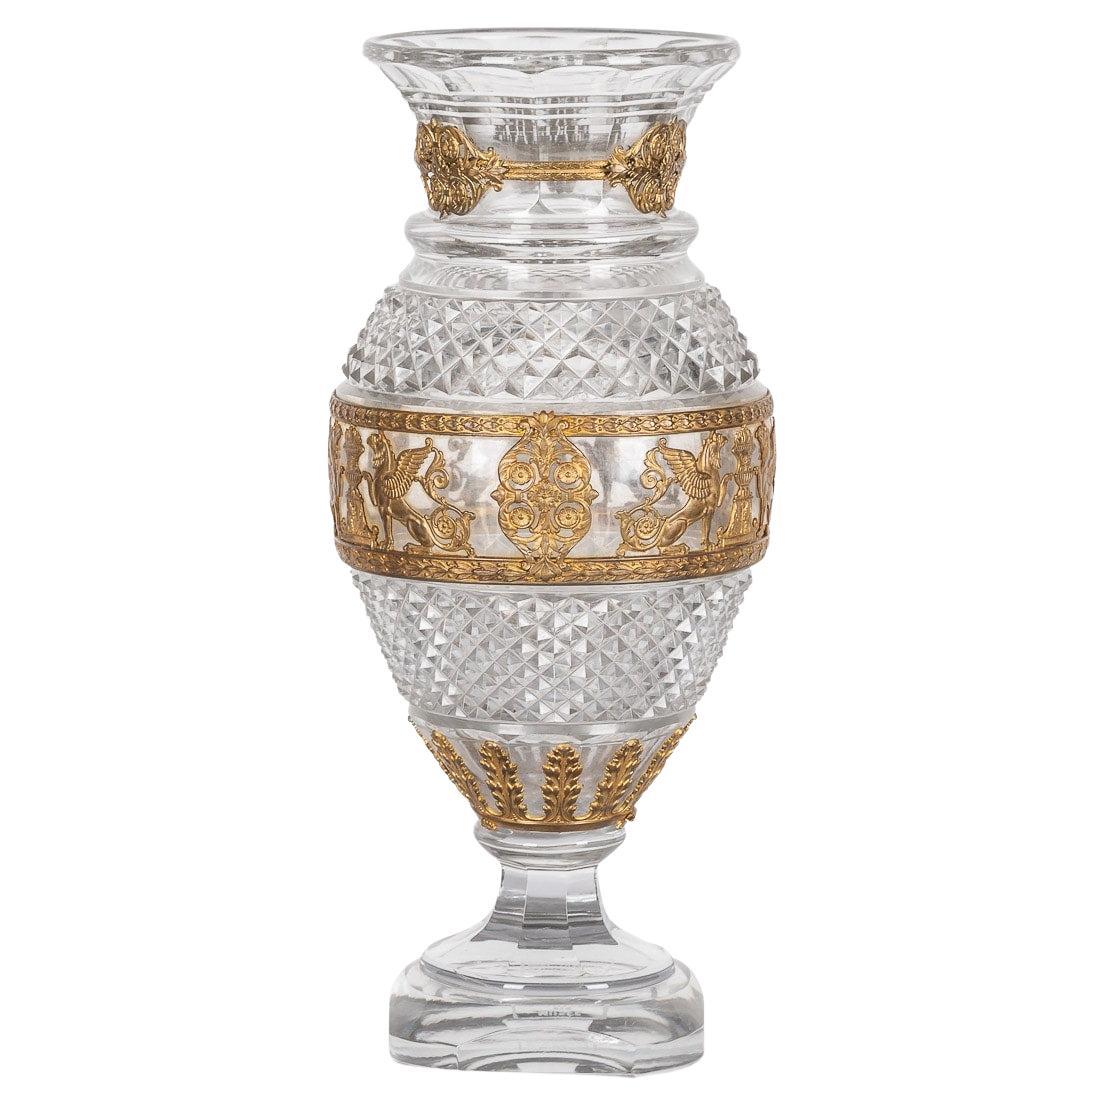 20th Century French Gold Plated & Baccarat Glass Vase, c.1900